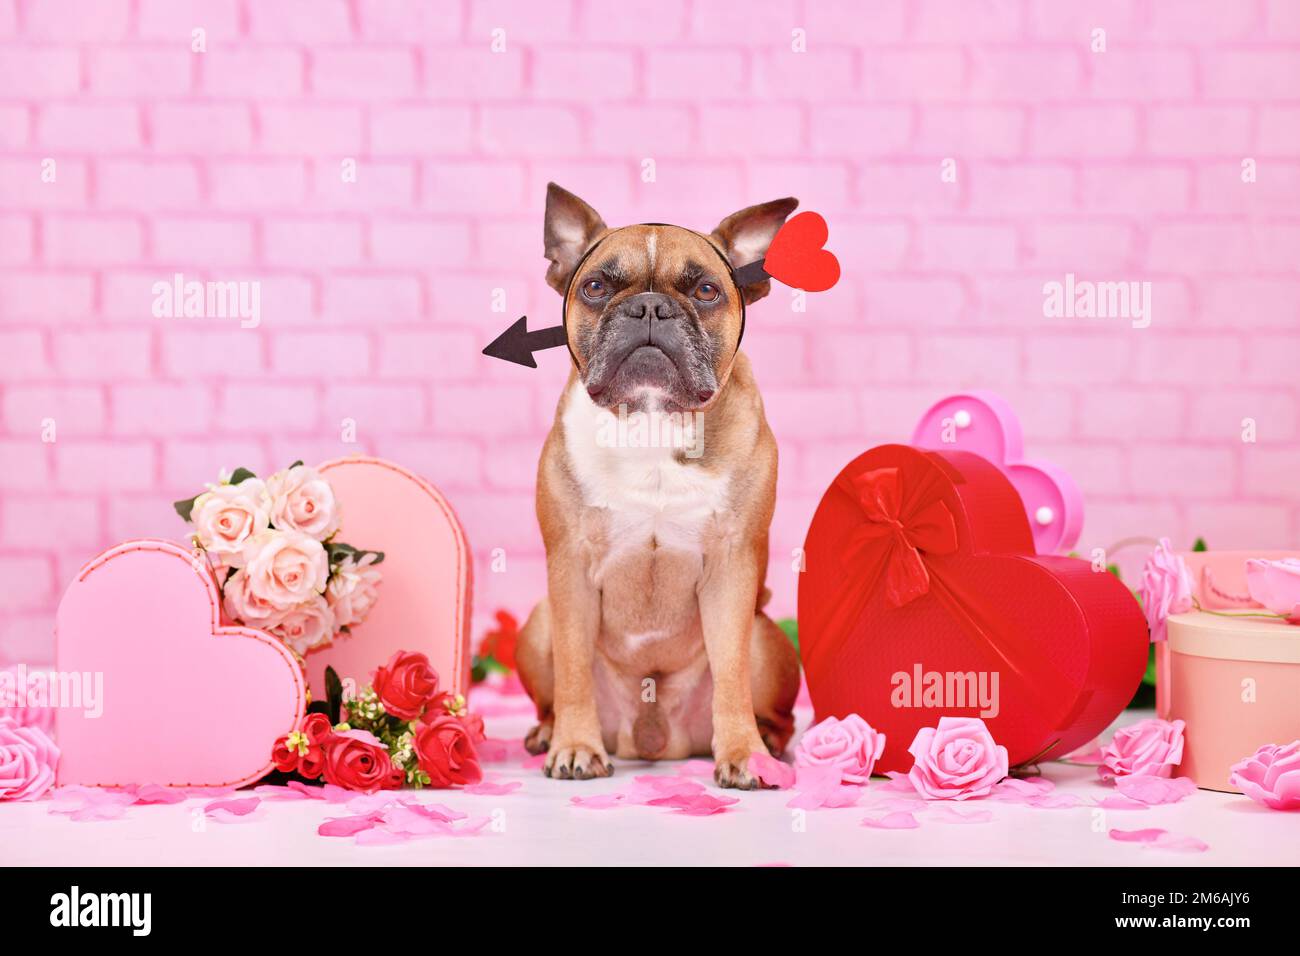 Cute Valentine's day dog. French Bulldog with  love arrow headbands surrounded by pink and red seasonal decoration like gift boxes and rose flowers Stock Photo